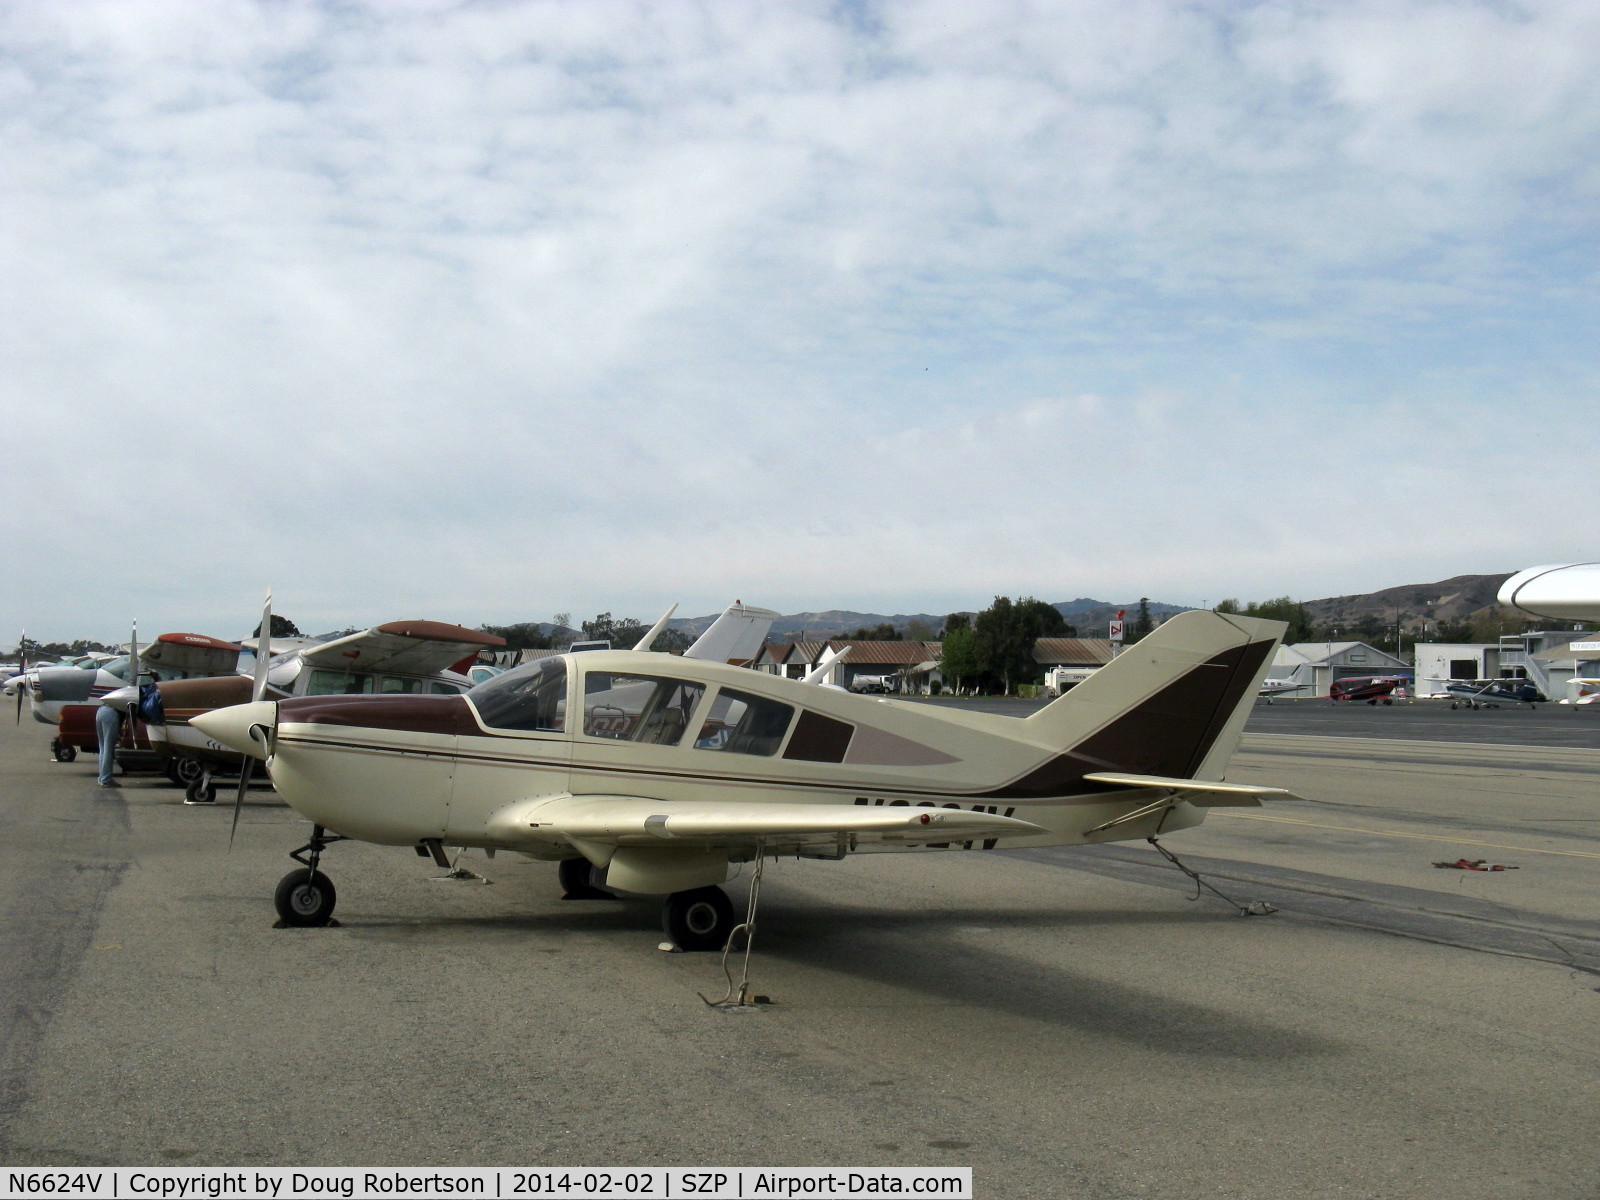 N6624V, 1970 Bellanca 17-31ATC Super Viking C/N 31008, 1970 Bellanca 17-31ATC SUPER TURBO VIKING, Lycoming TIO-540 290 Hp, the rarest of Super Turbo Vikings with 290 Hp, only 11 built 1969-1970. TBO-1,400 hours. Cruise speed 235 mph.